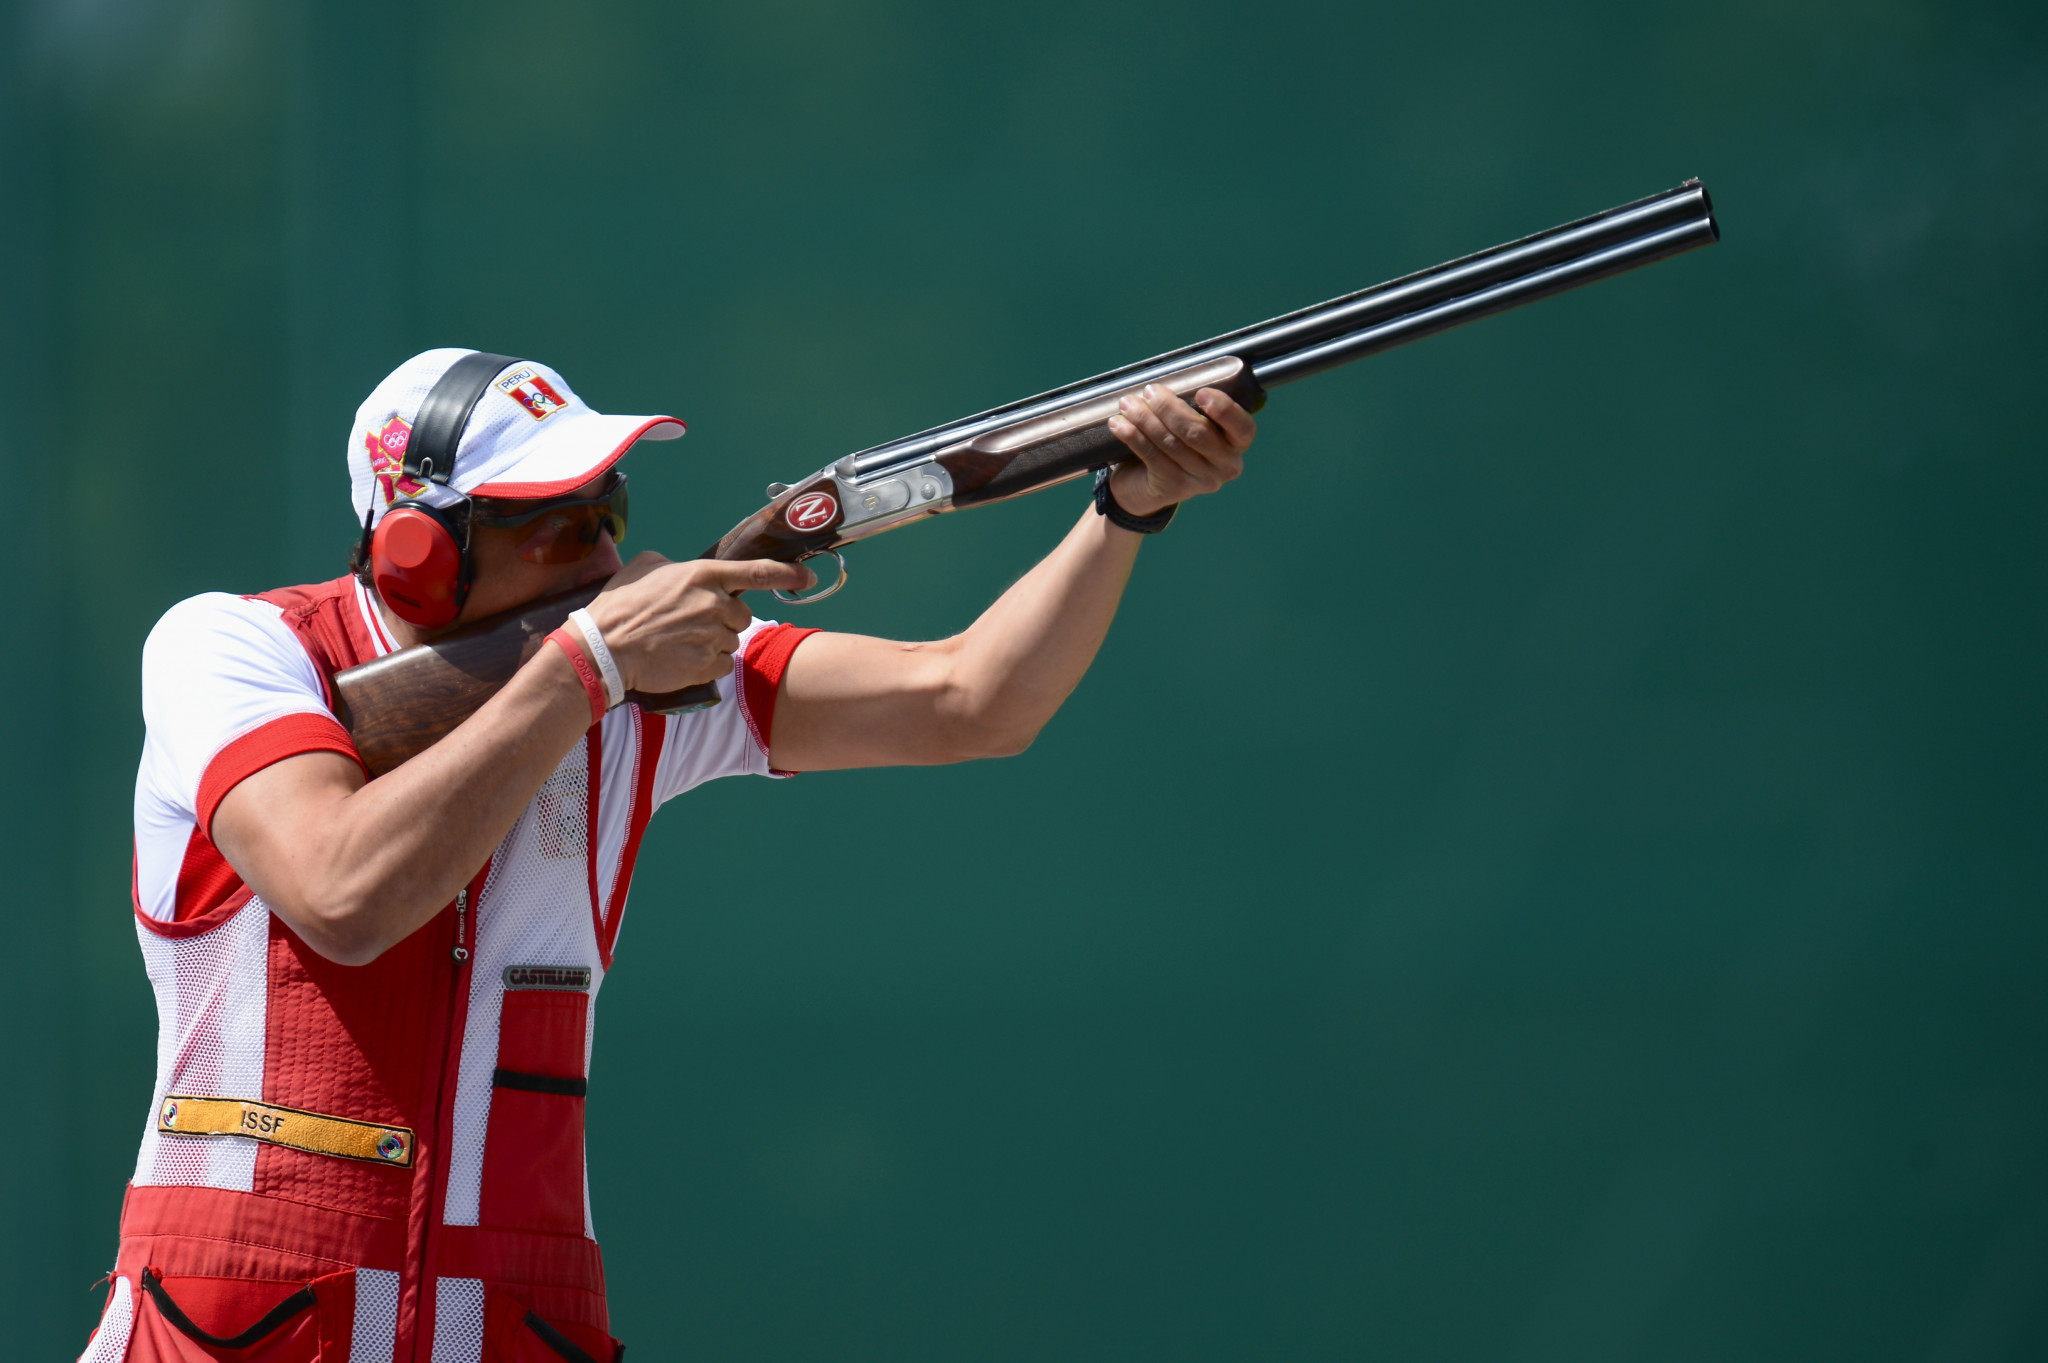 Espinosa and Vizzi claim skeet titles at ISSF Shotgun World Cup in Lima